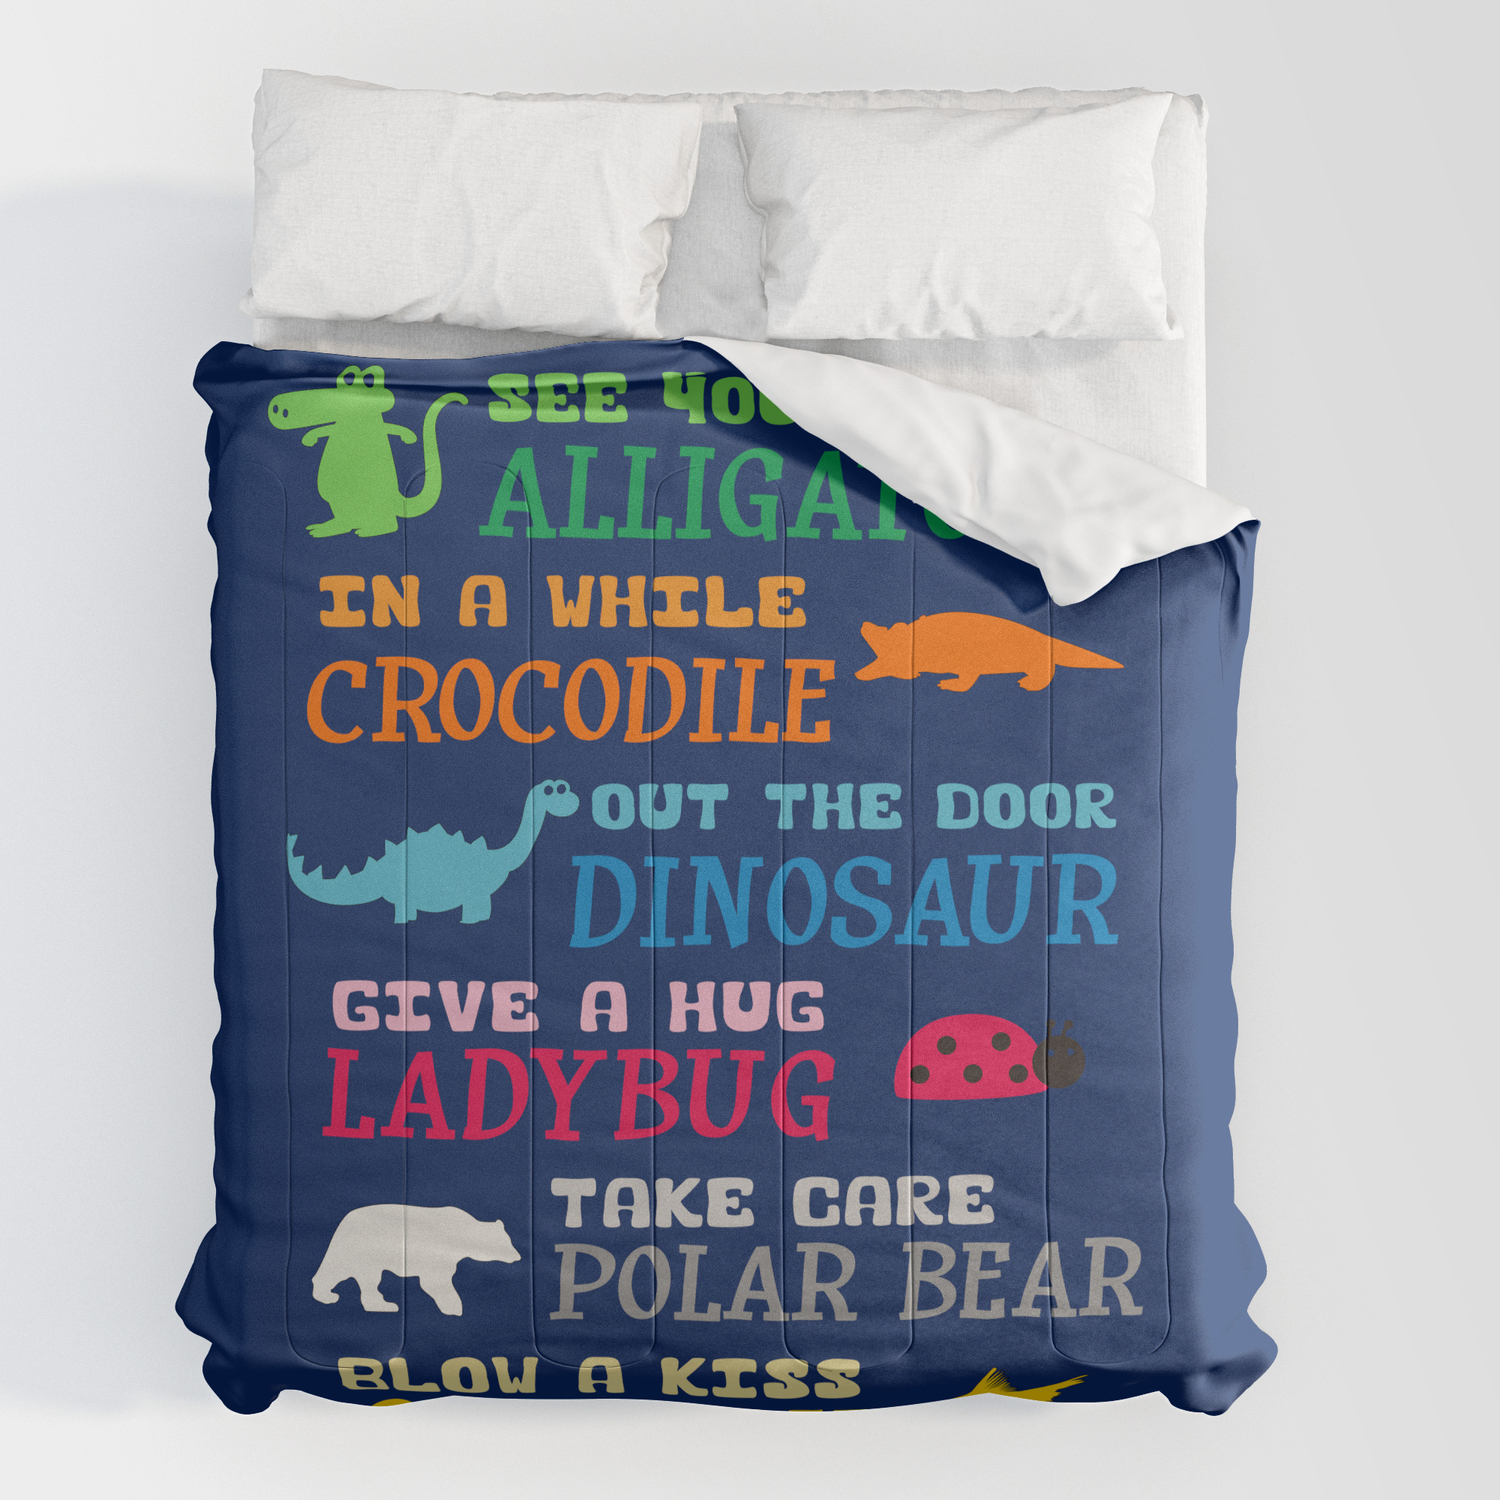 See You Later Alligator In A While Crocodile Comforters By Socoart Society6